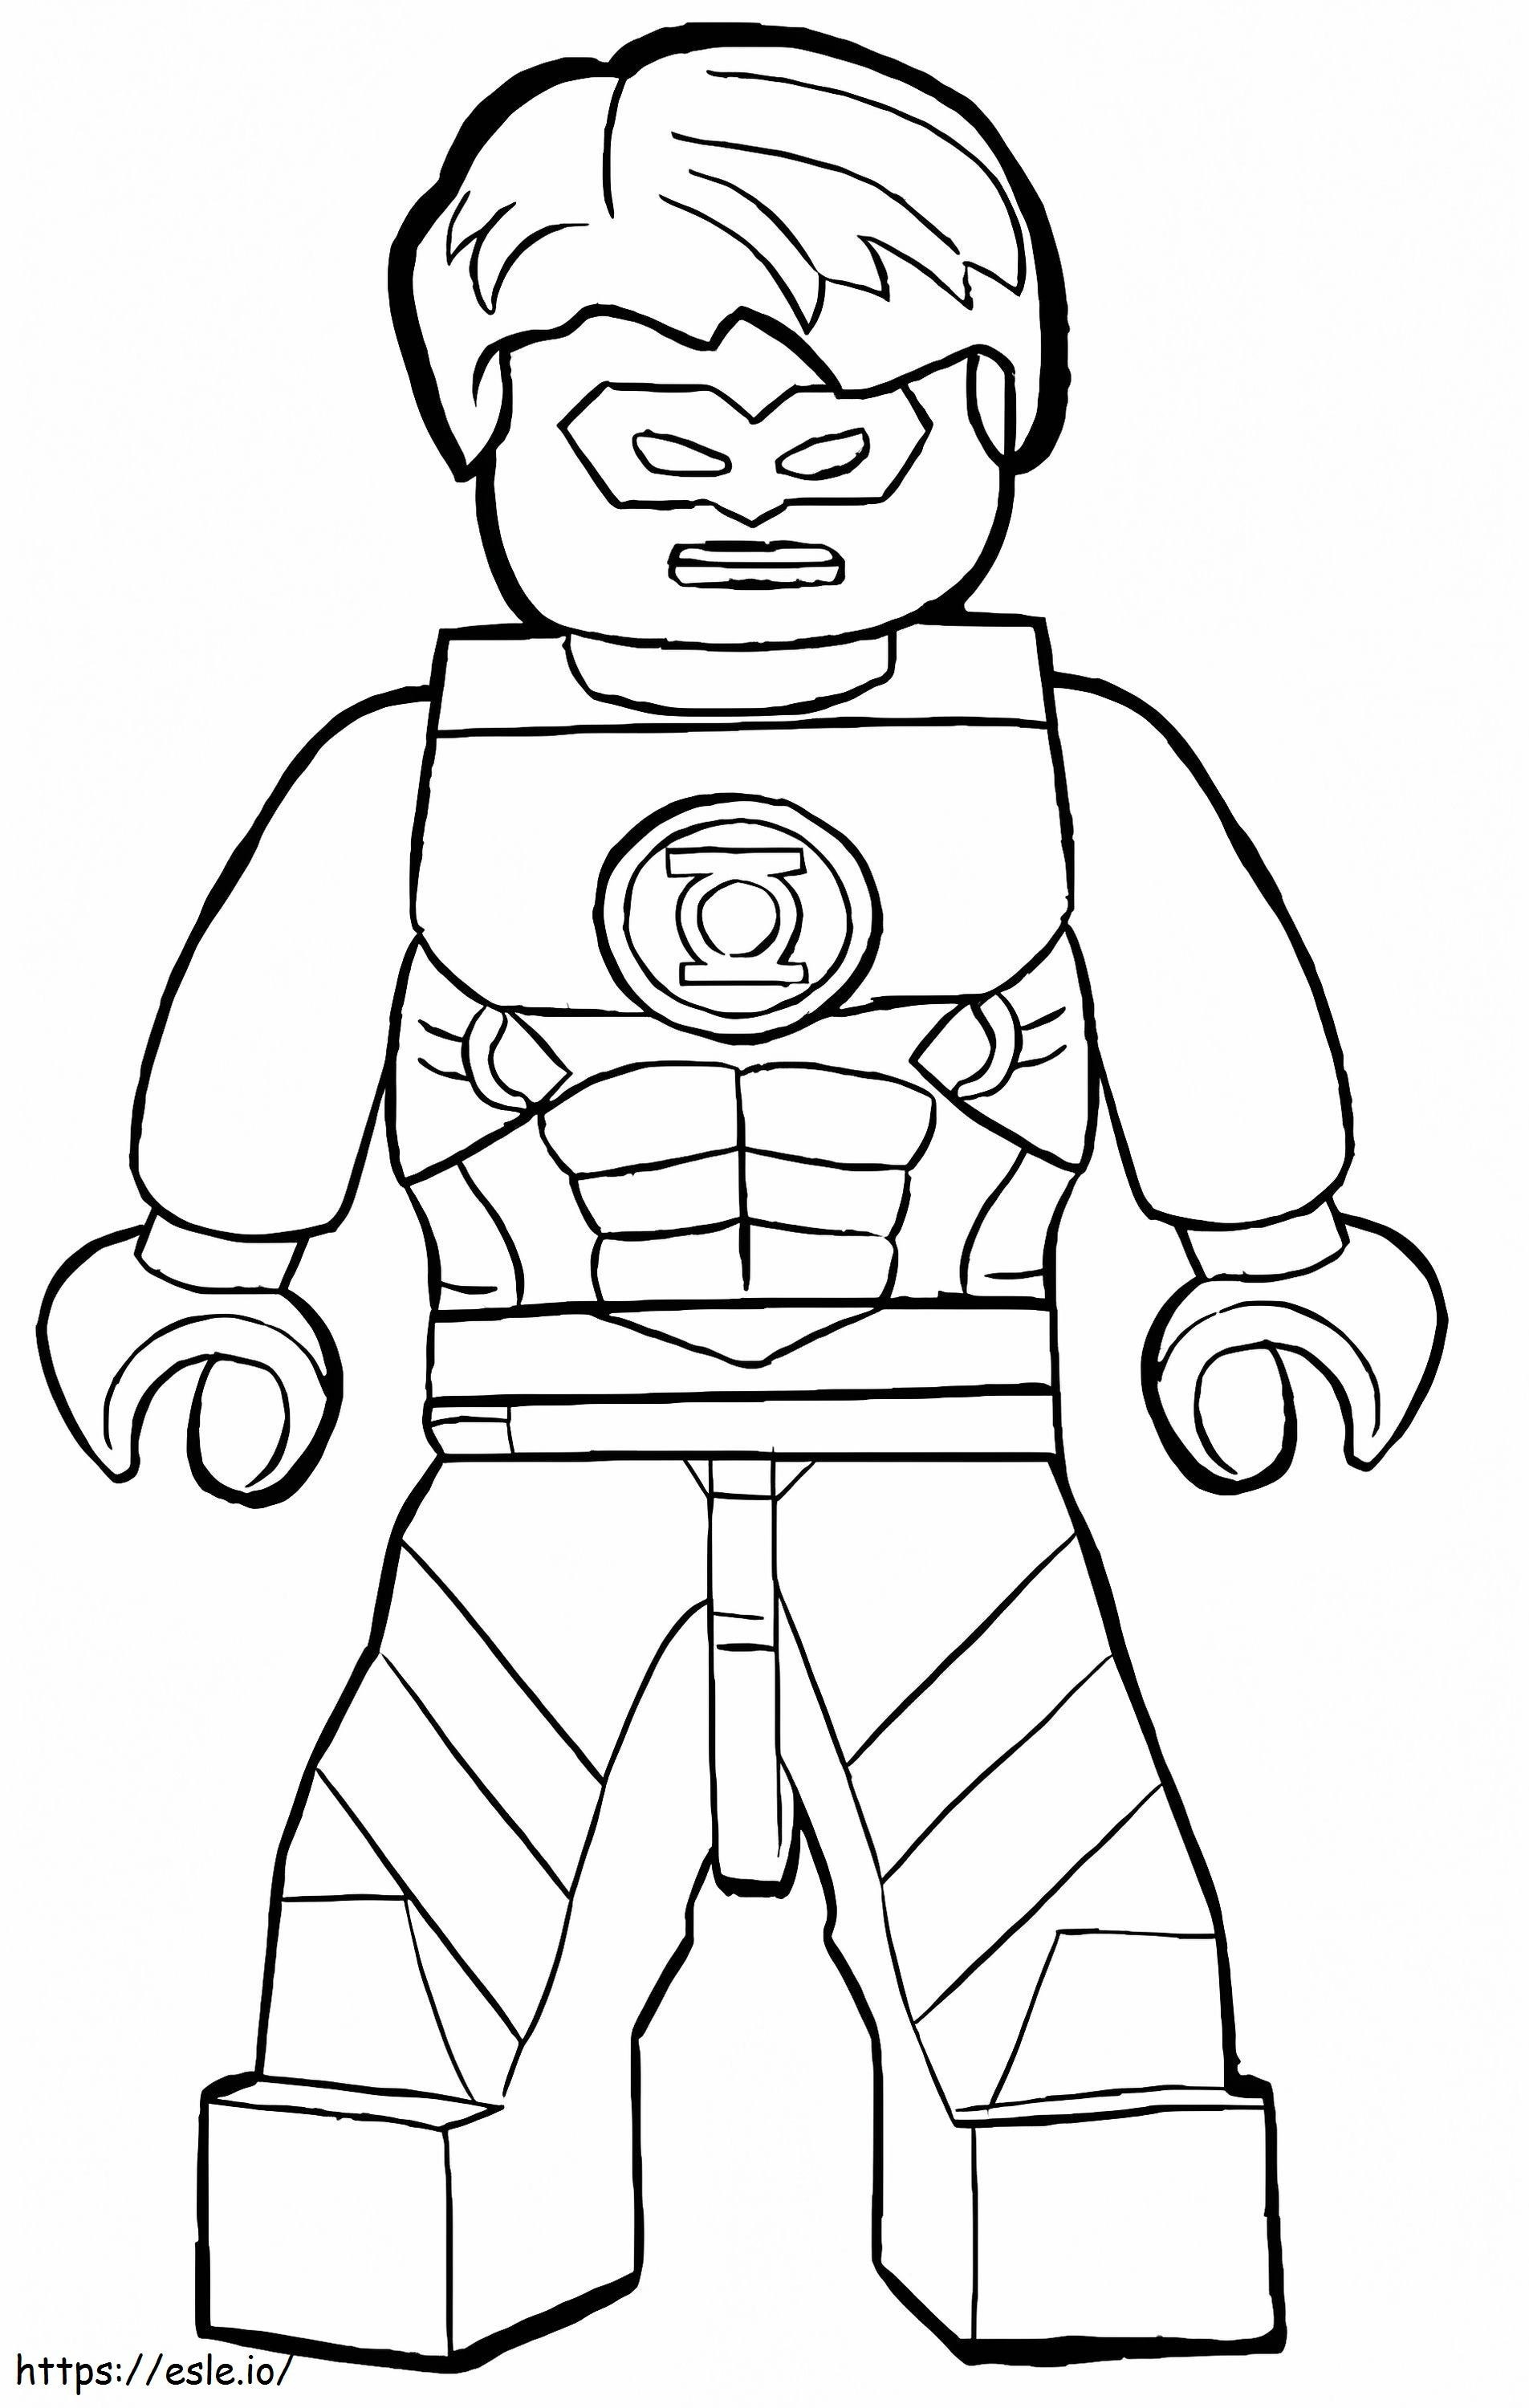 Lego Green Lantern coloring page